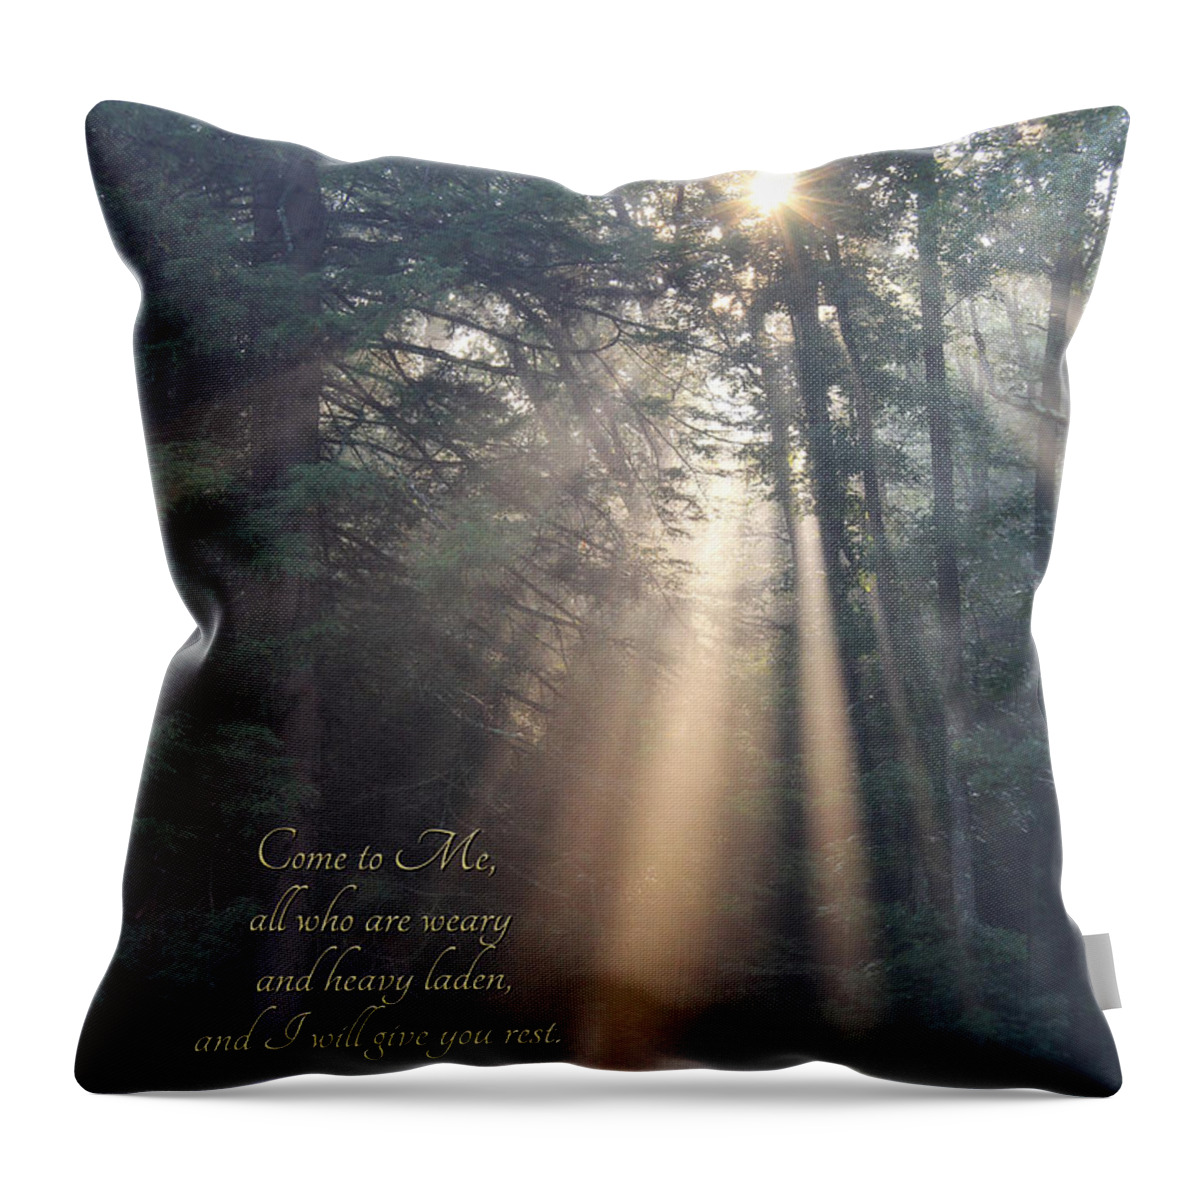 Inspirational Throw Pillow featuring the photograph Come to Me by Lori Deiter